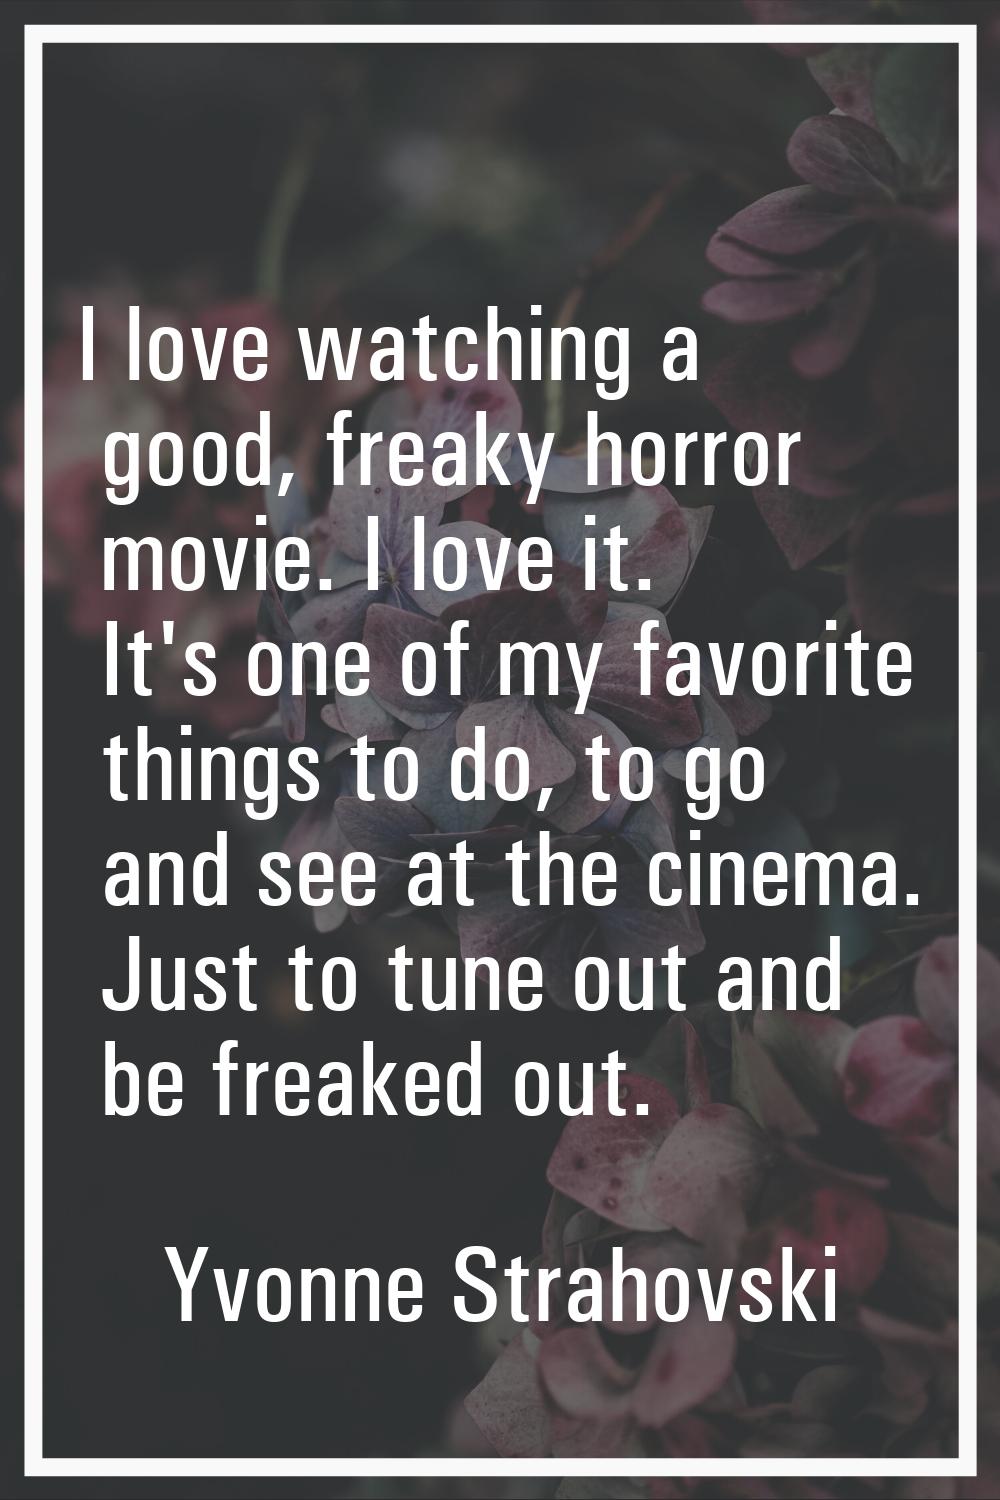 I love watching a good, freaky horror movie. I love it. It's one of my favorite things to do, to go